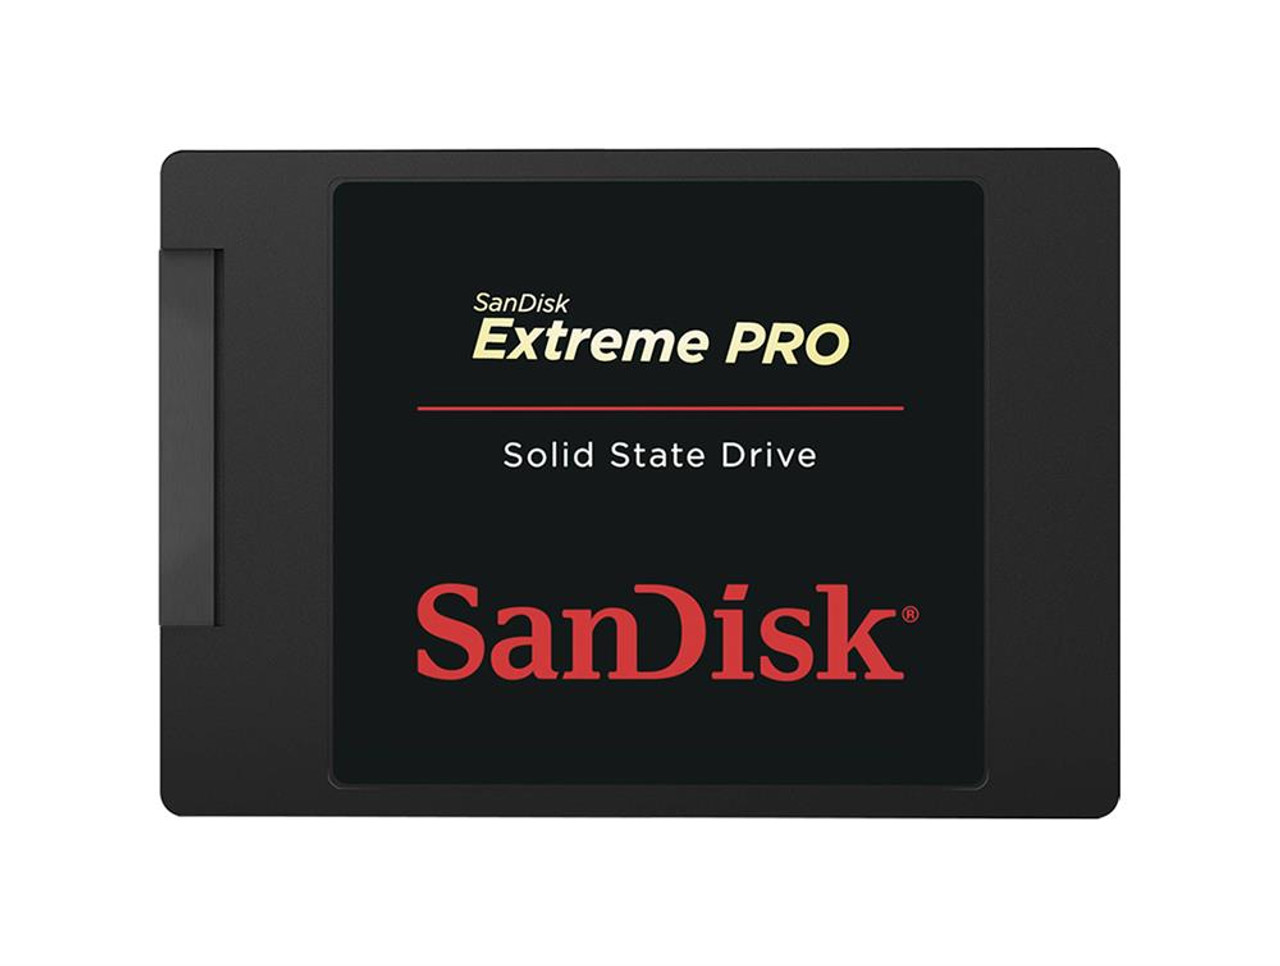 SDSSDXPS-960G-Q25 SanDisk Extreme PRO 960GB MLC SATA 6Gbps 2.5-inch Internal Solid State Drive (SSD)